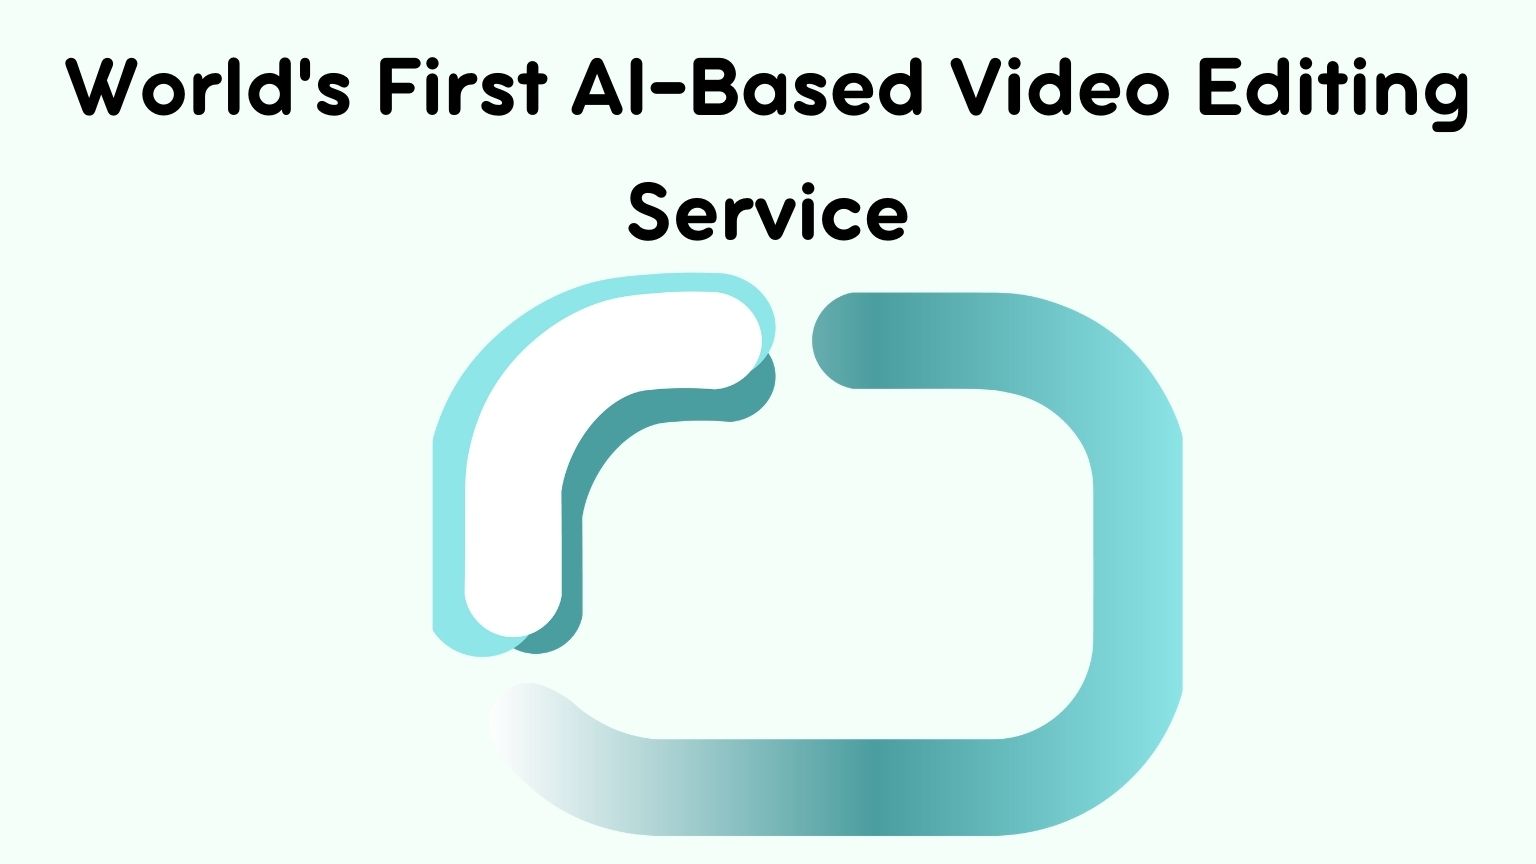 World's First AI-Based Video Editing Service